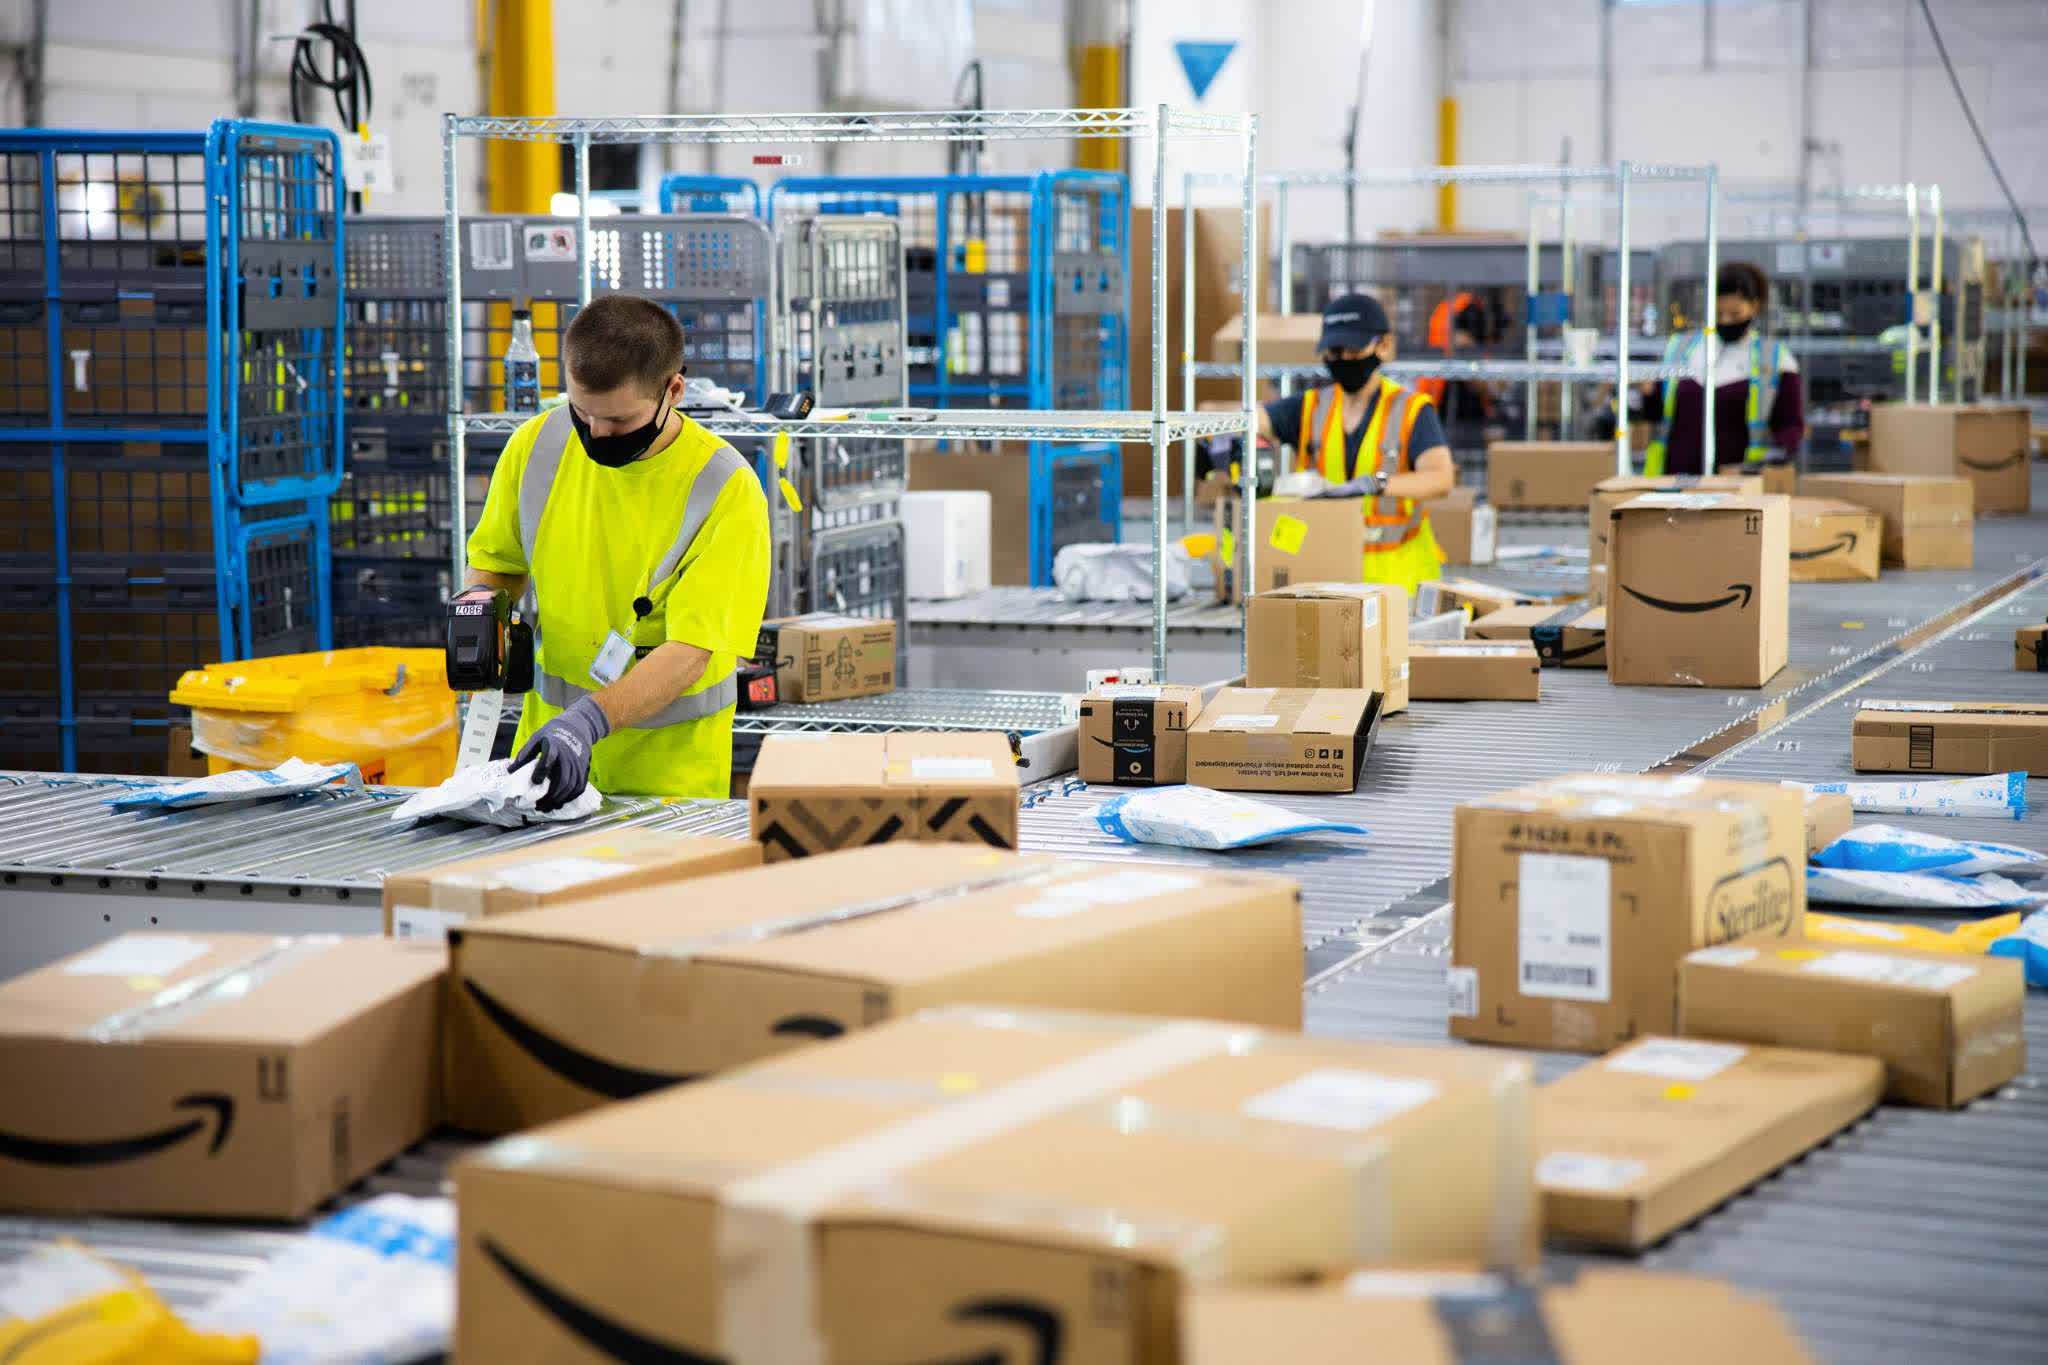 Amazon operations manager who stole $273K worth of PC components pleads guilty to mail fraud